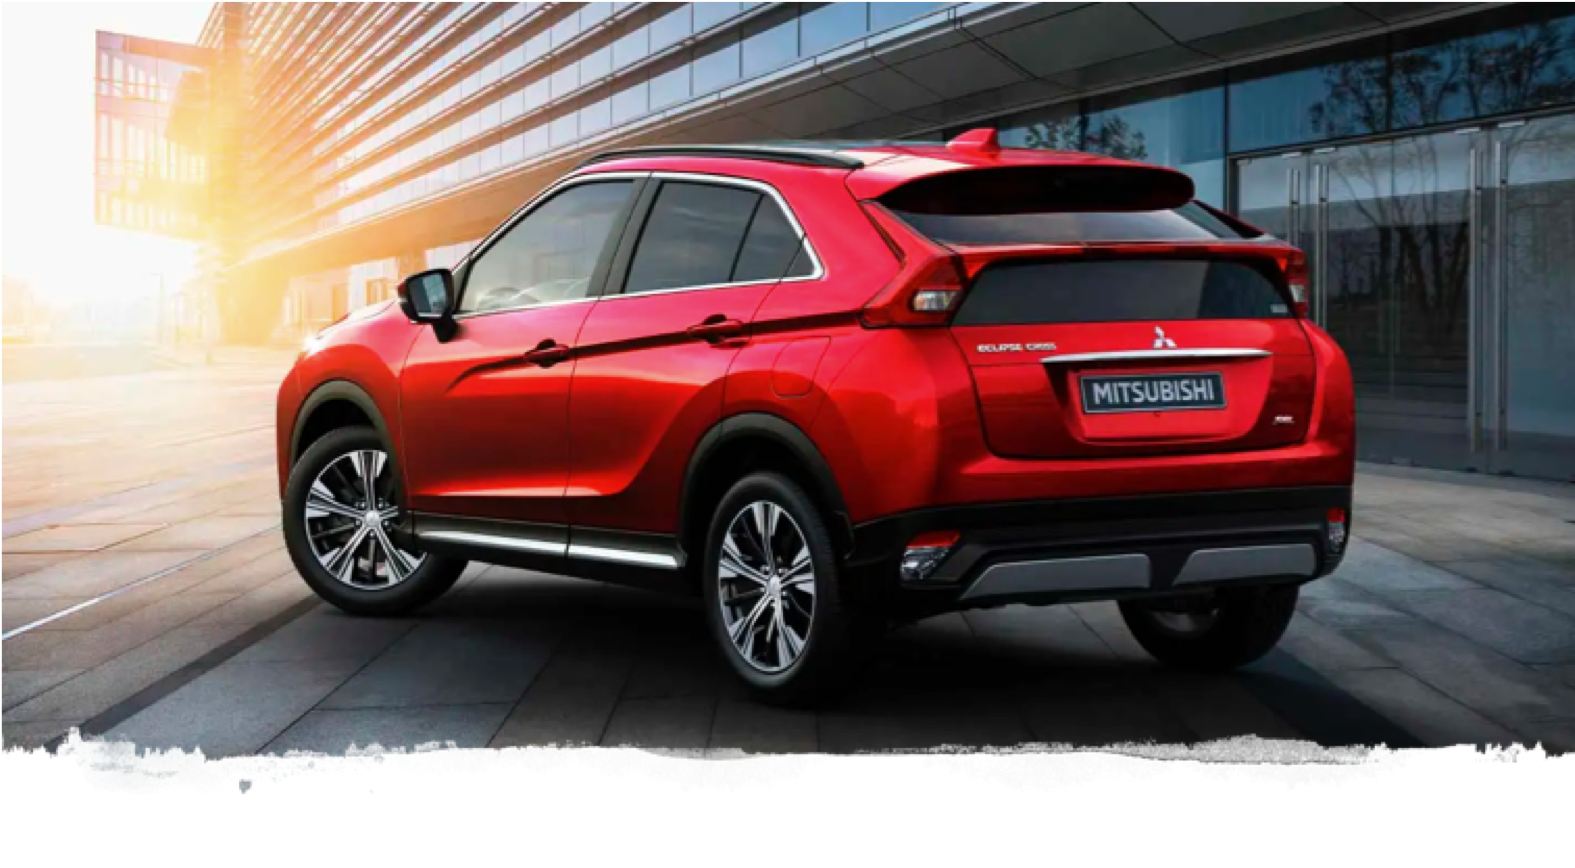 Check out Features on the new 2020 Eclipse Cross from Mitsubishi